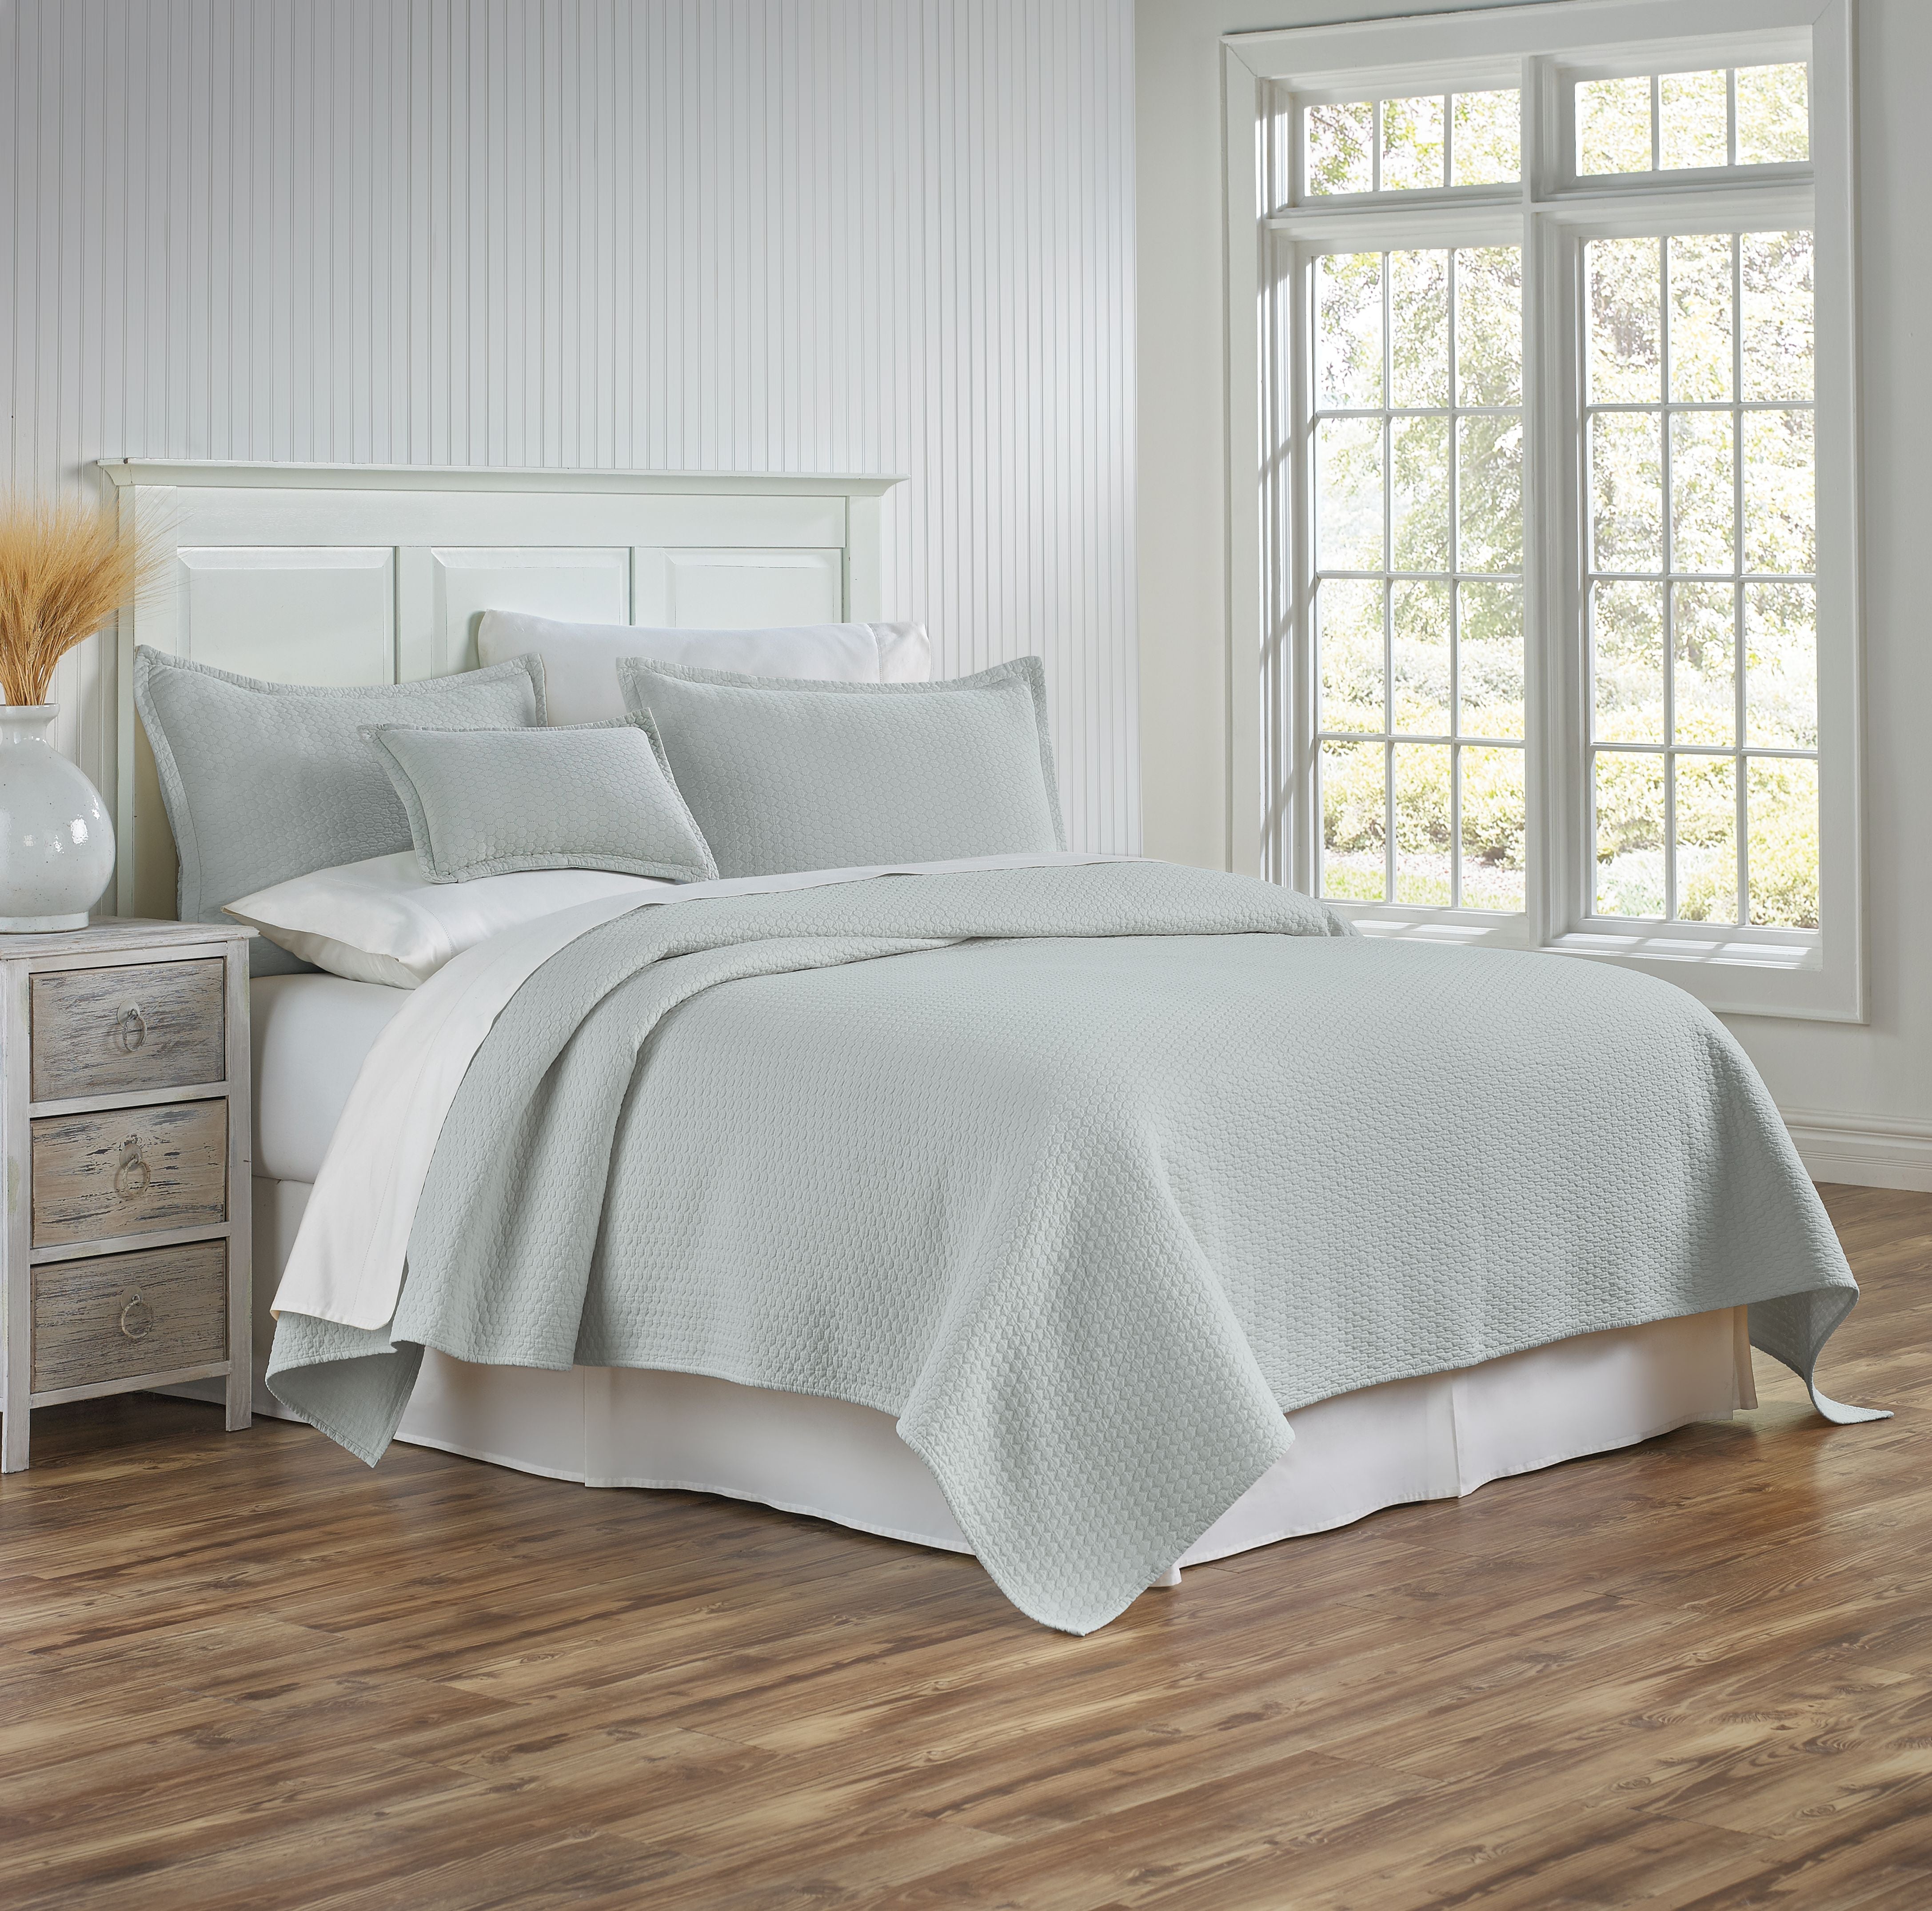 King Tracey Coverlet - Sea Glass